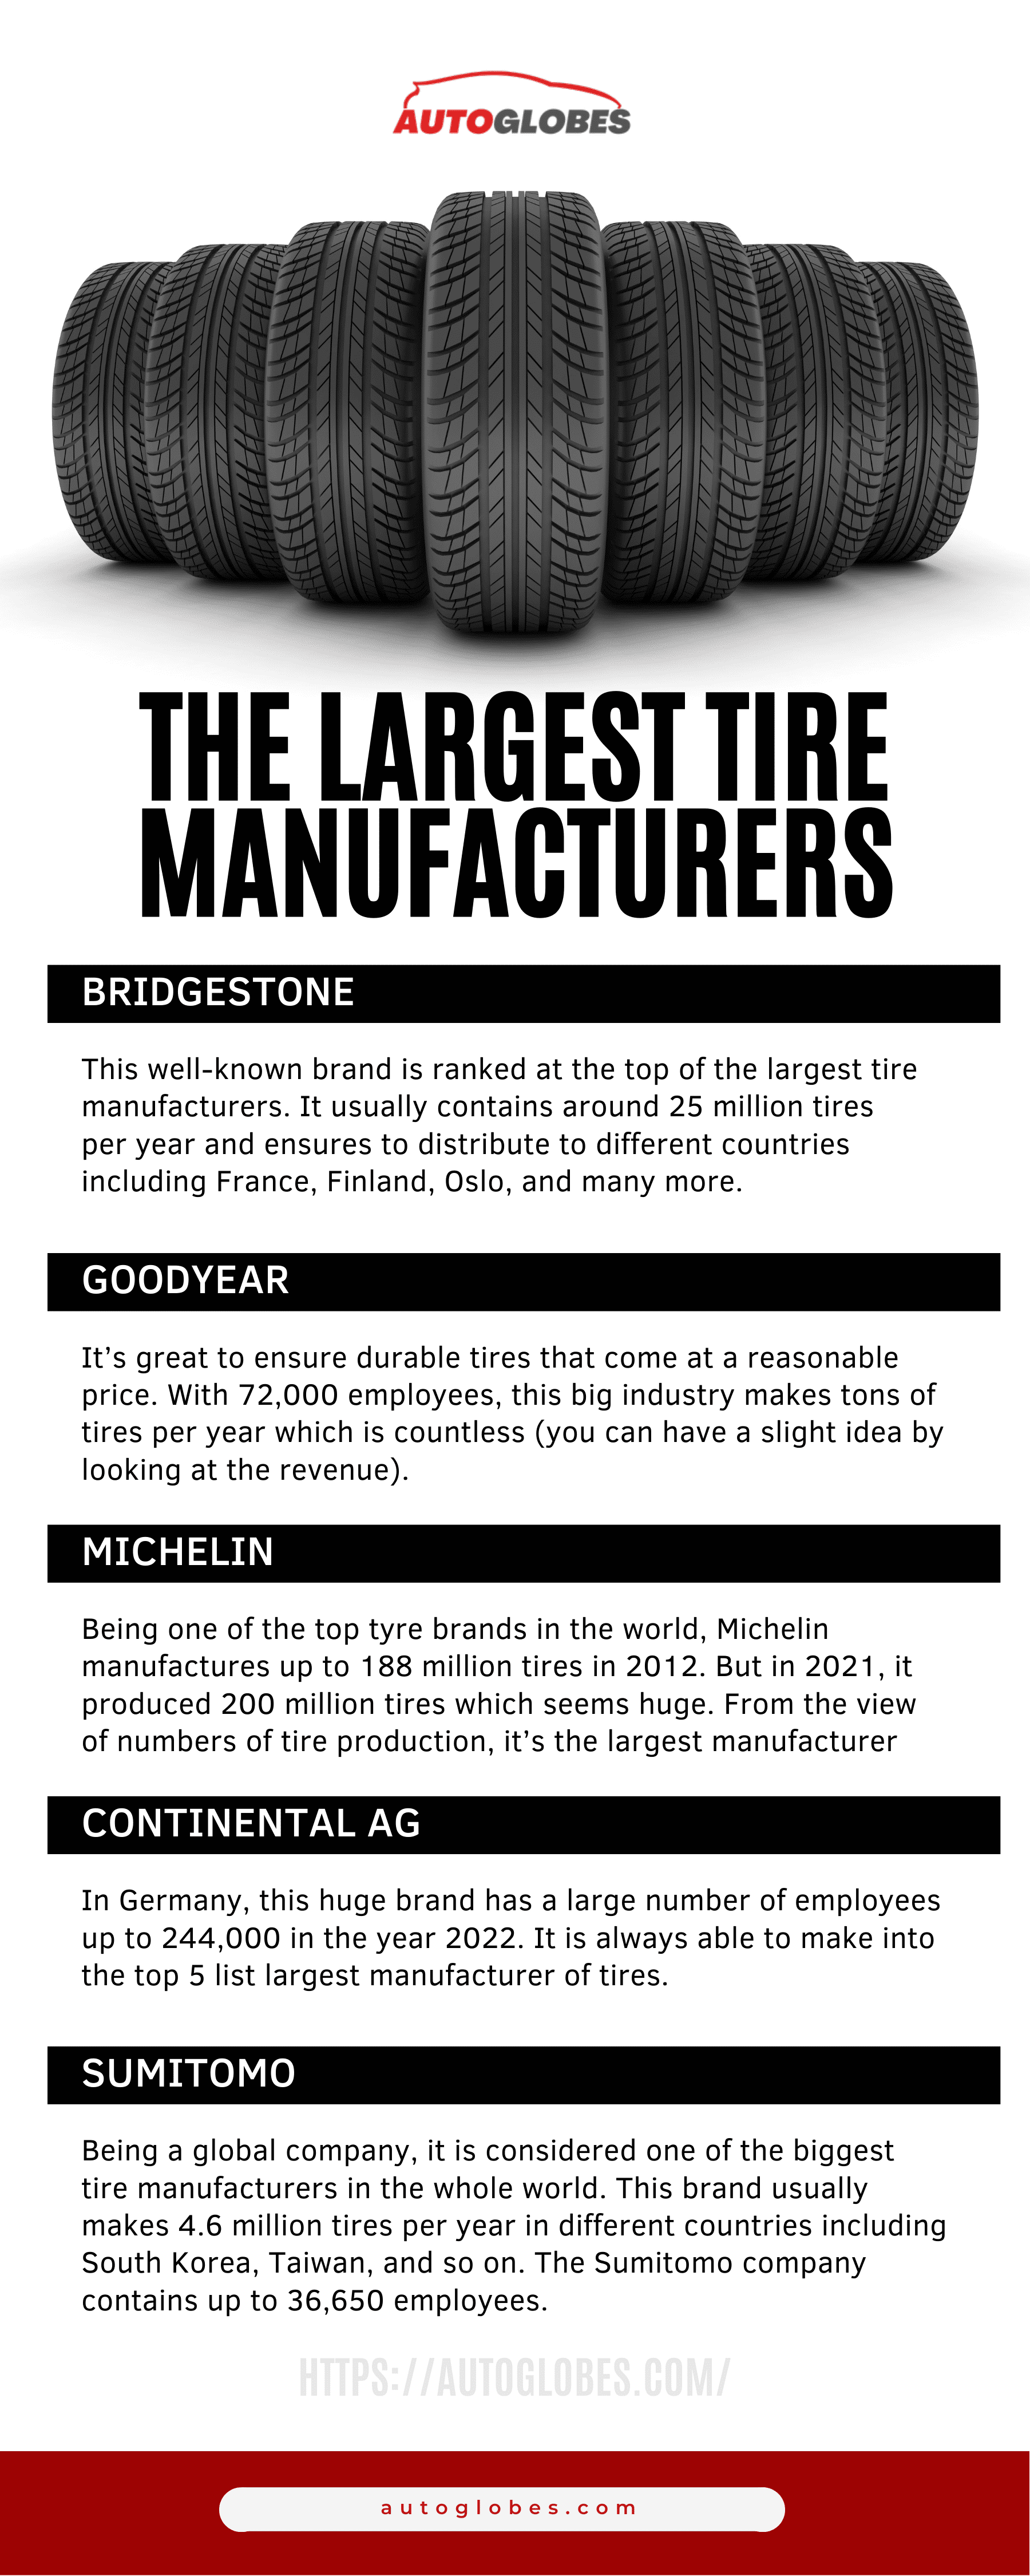 The Largest Tire Manufacturers Infographic